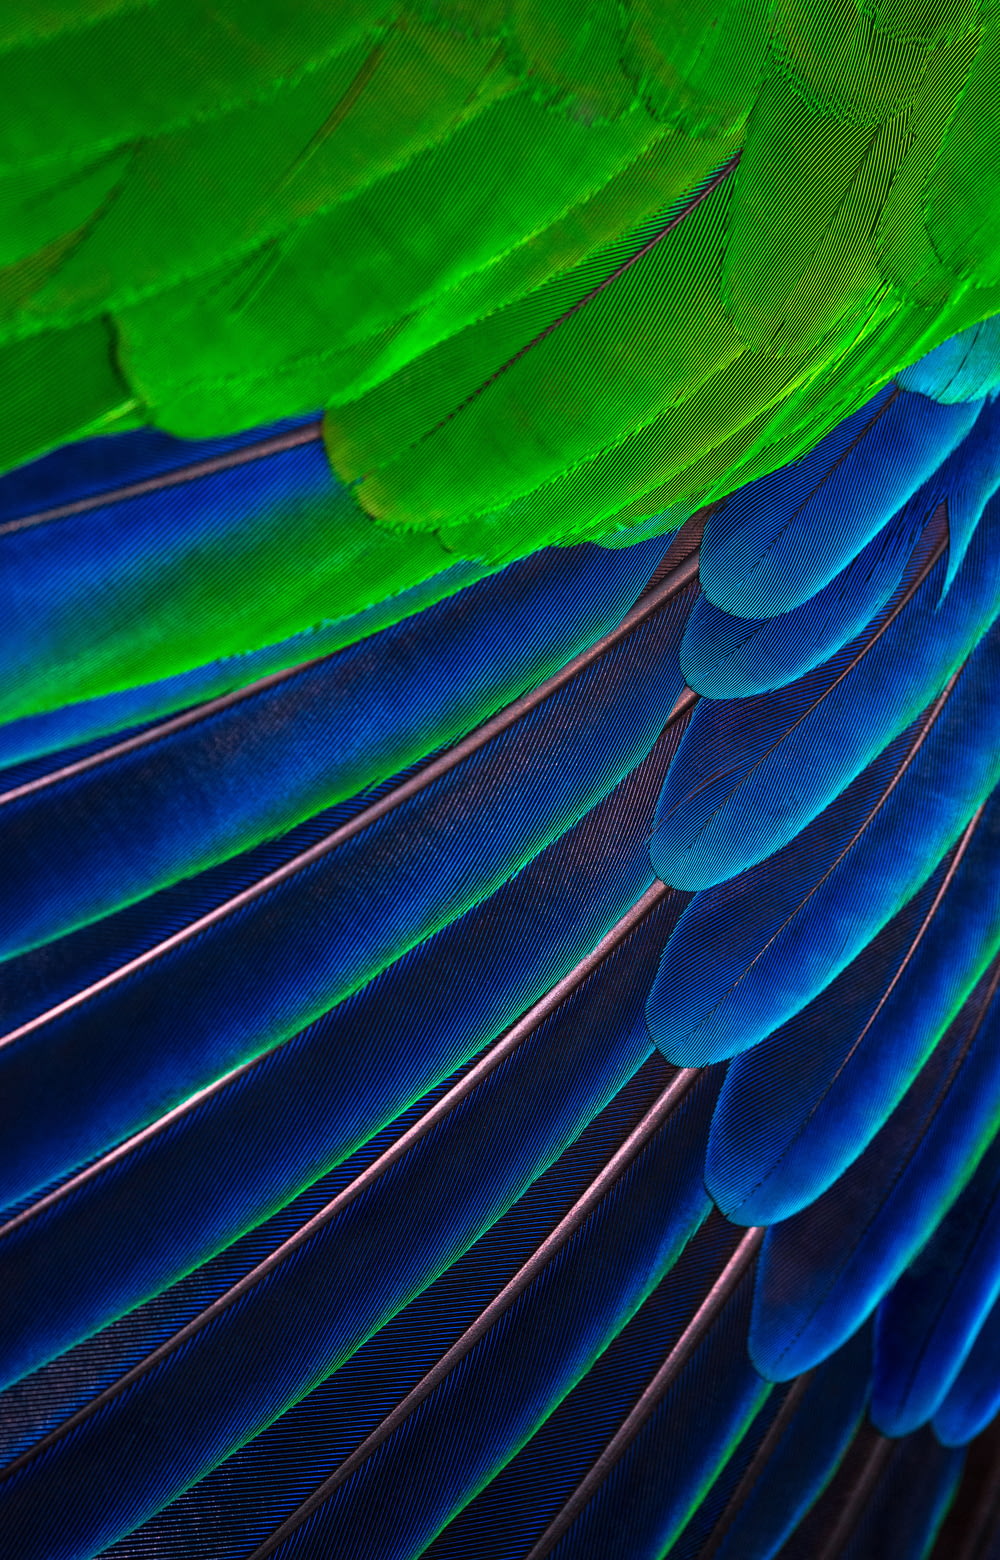 green and blue feather close-up photography